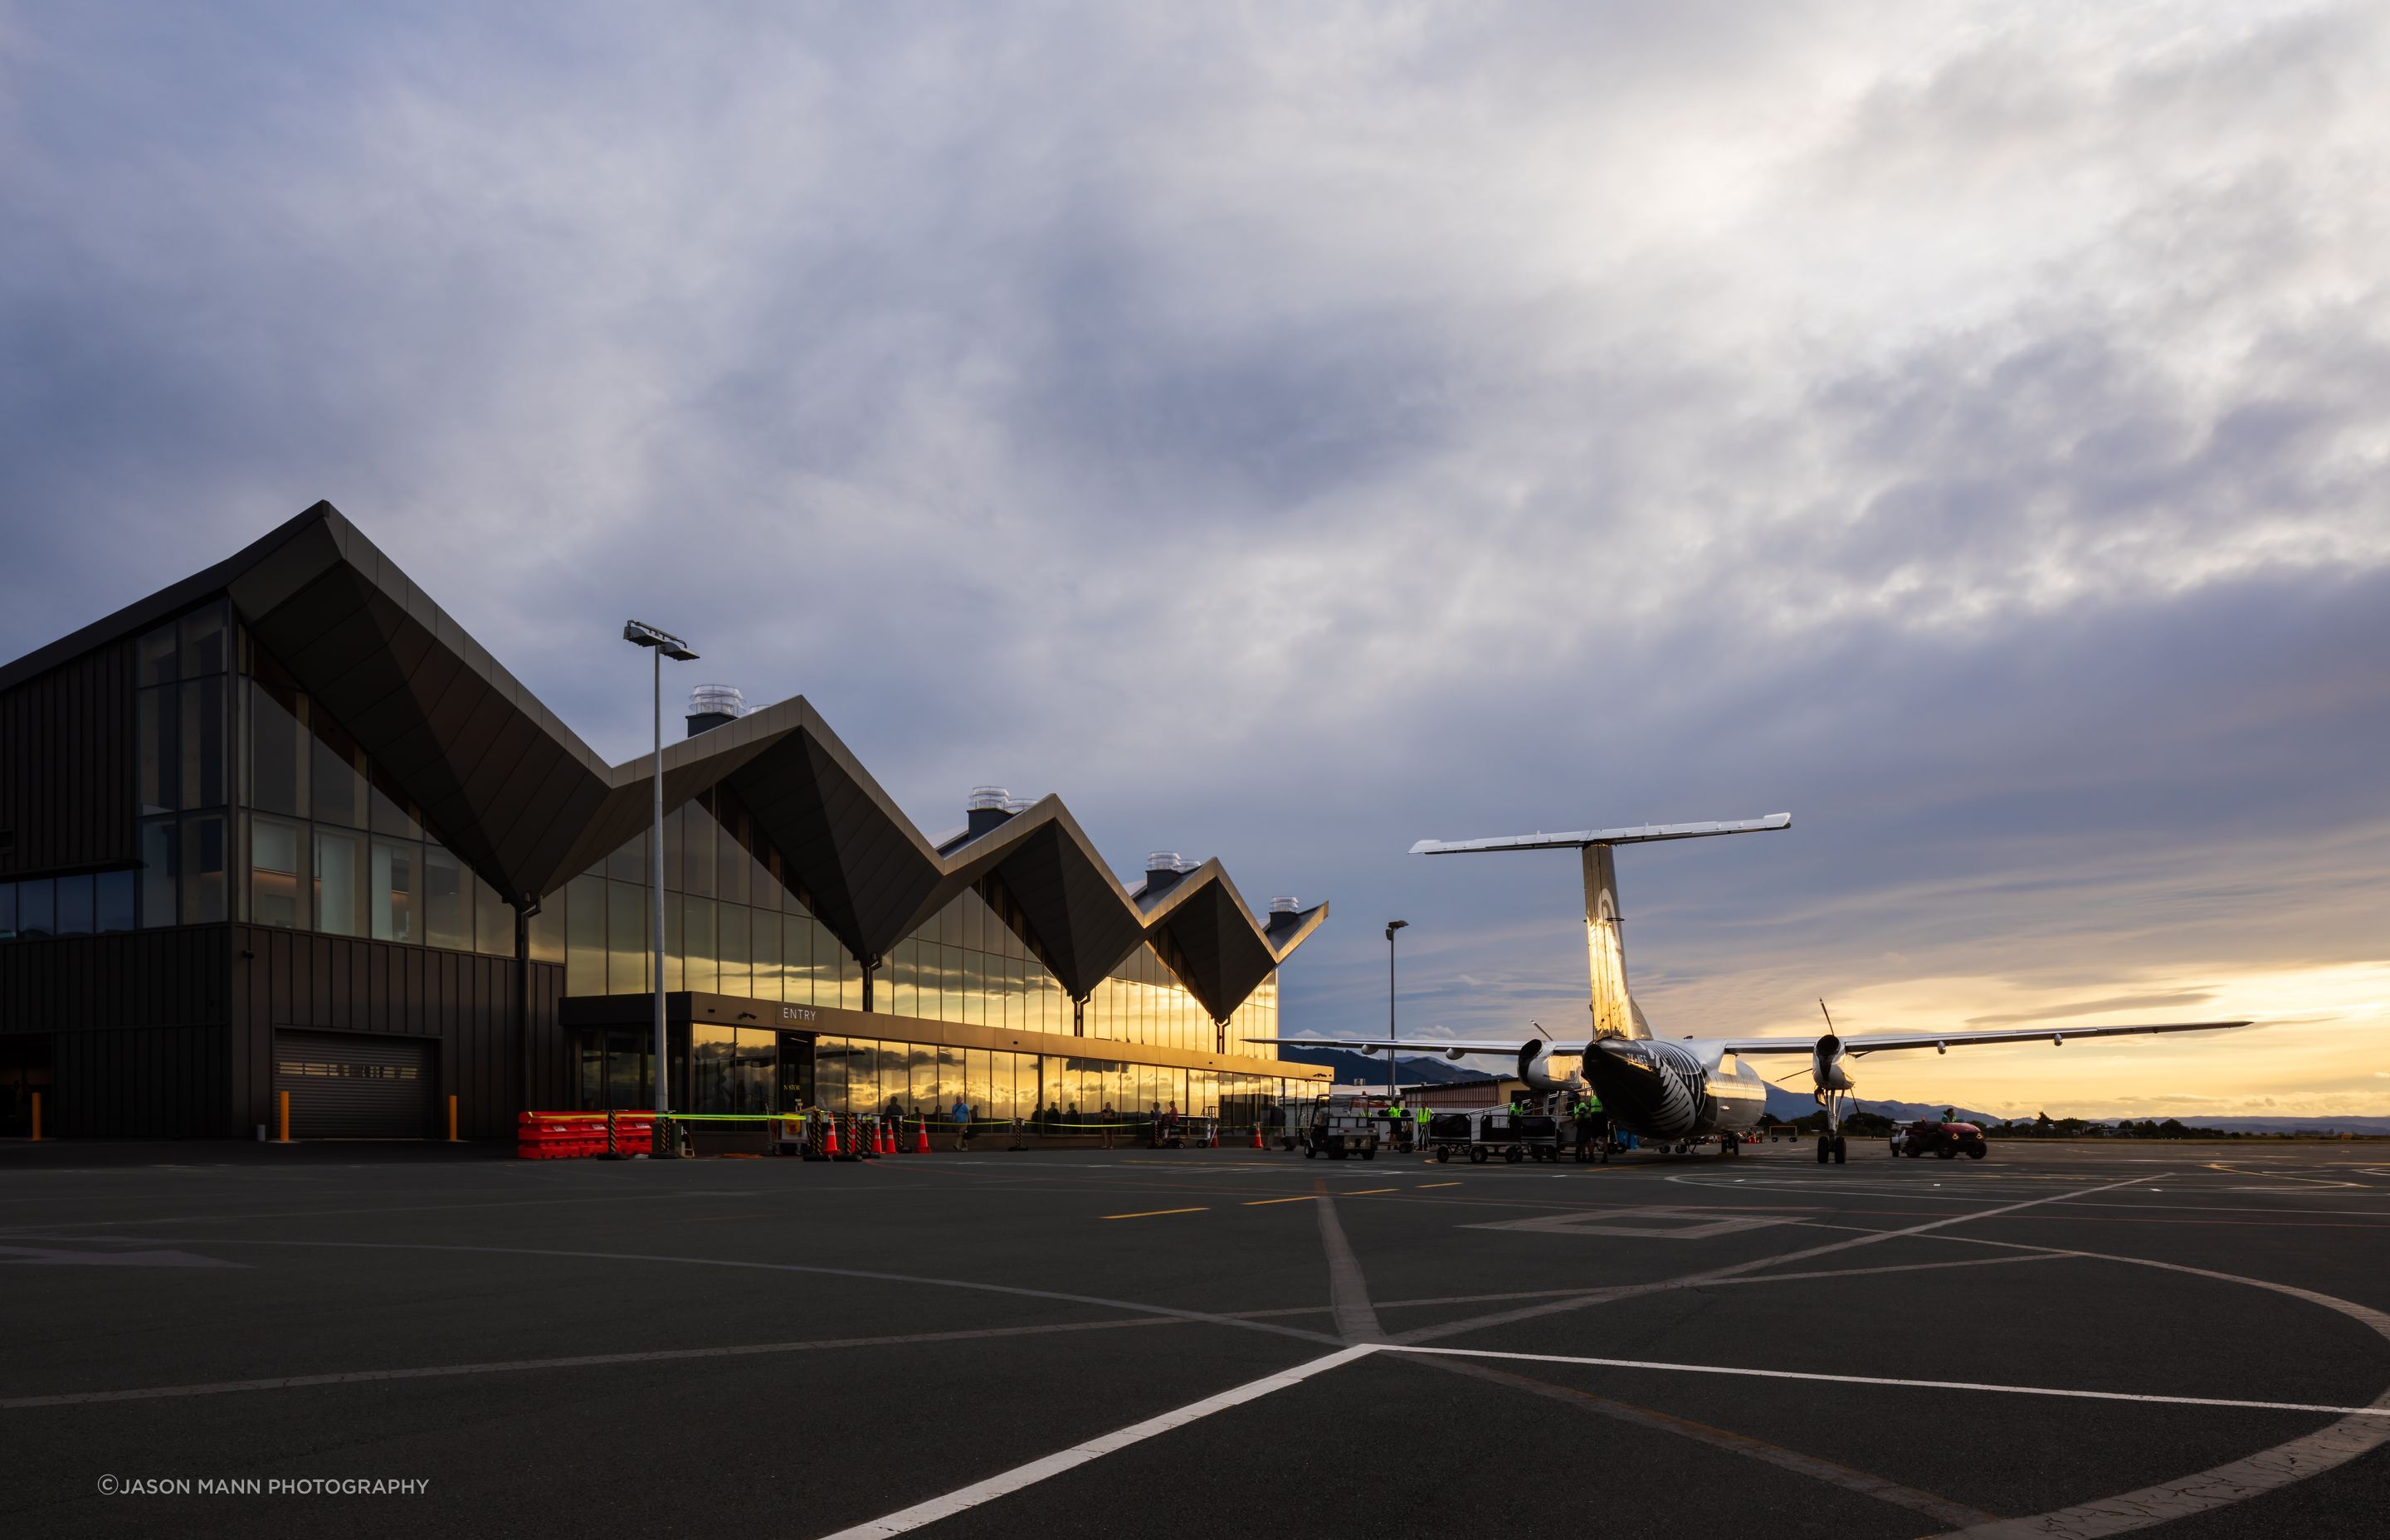 One of the busiest airports in the country, the new terminal at Nelson Airport has been designed to comfortably accommodate projected passenger numbers to 2035.